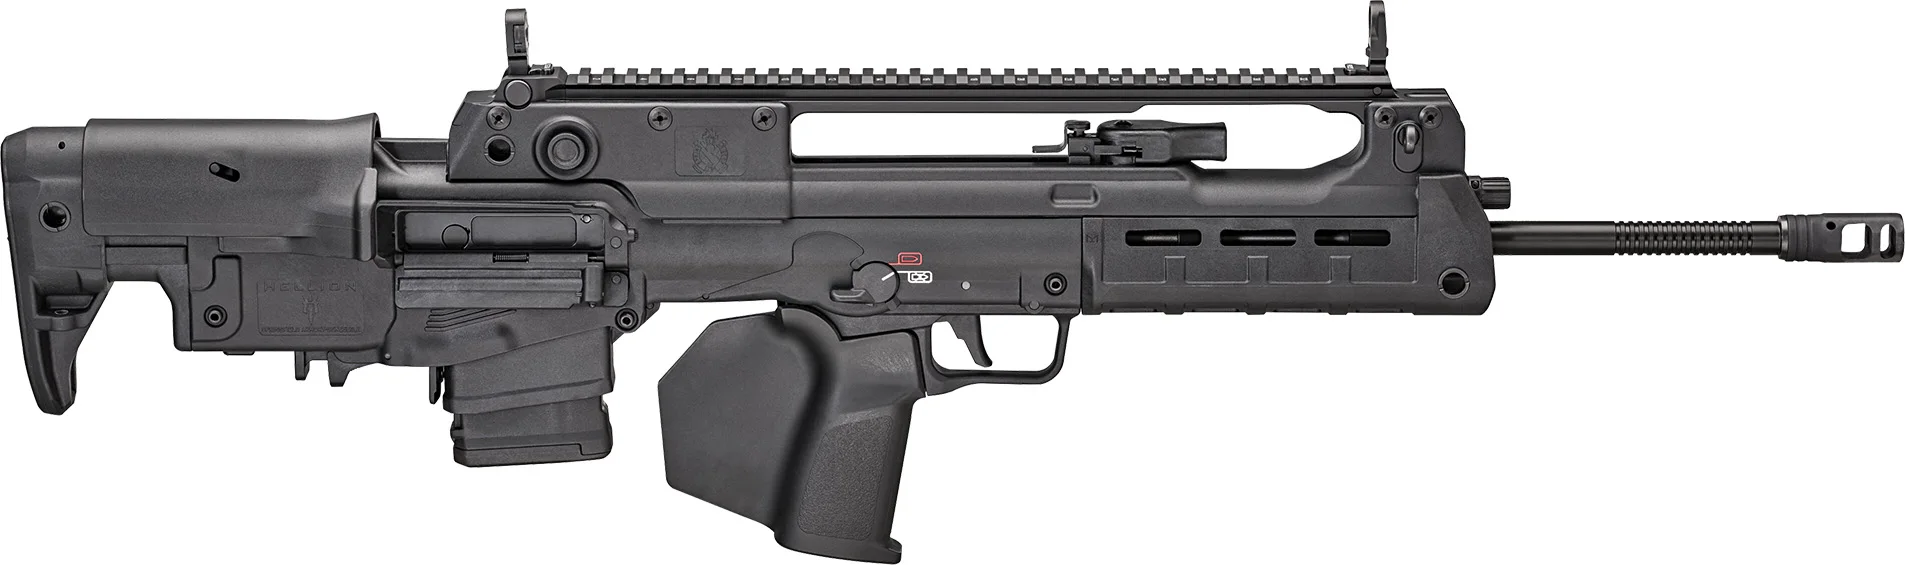 https://www.spartantacticals.com/products/springfield-armory-706397973186-6388